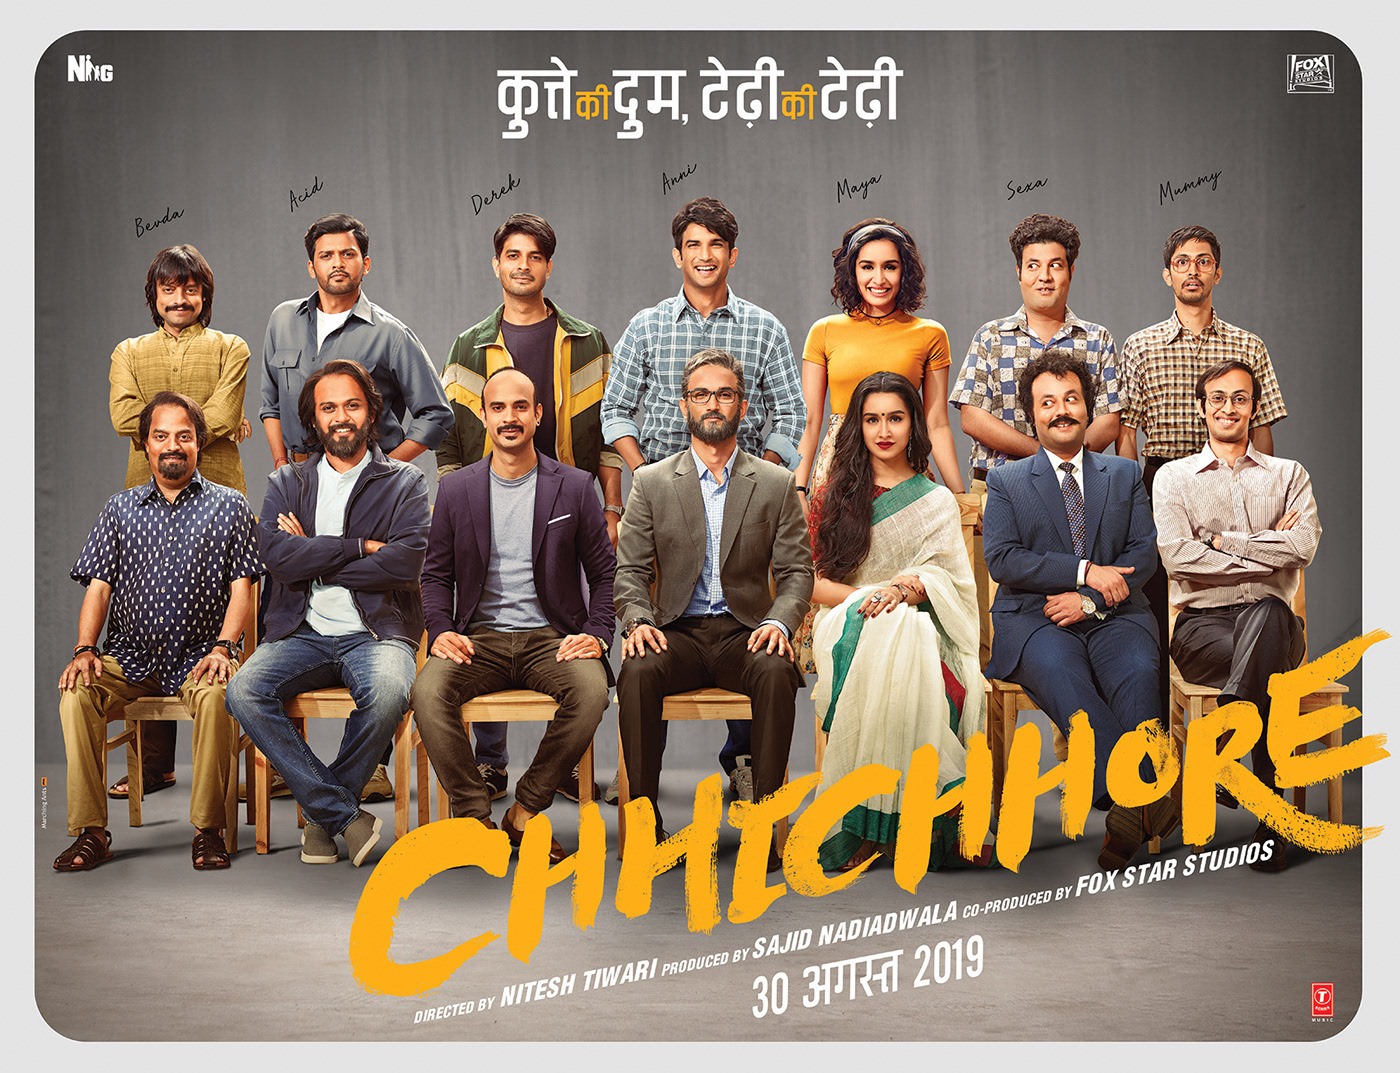 Extra Large Movie Poster Image for Chhichhore (#2 of 2)